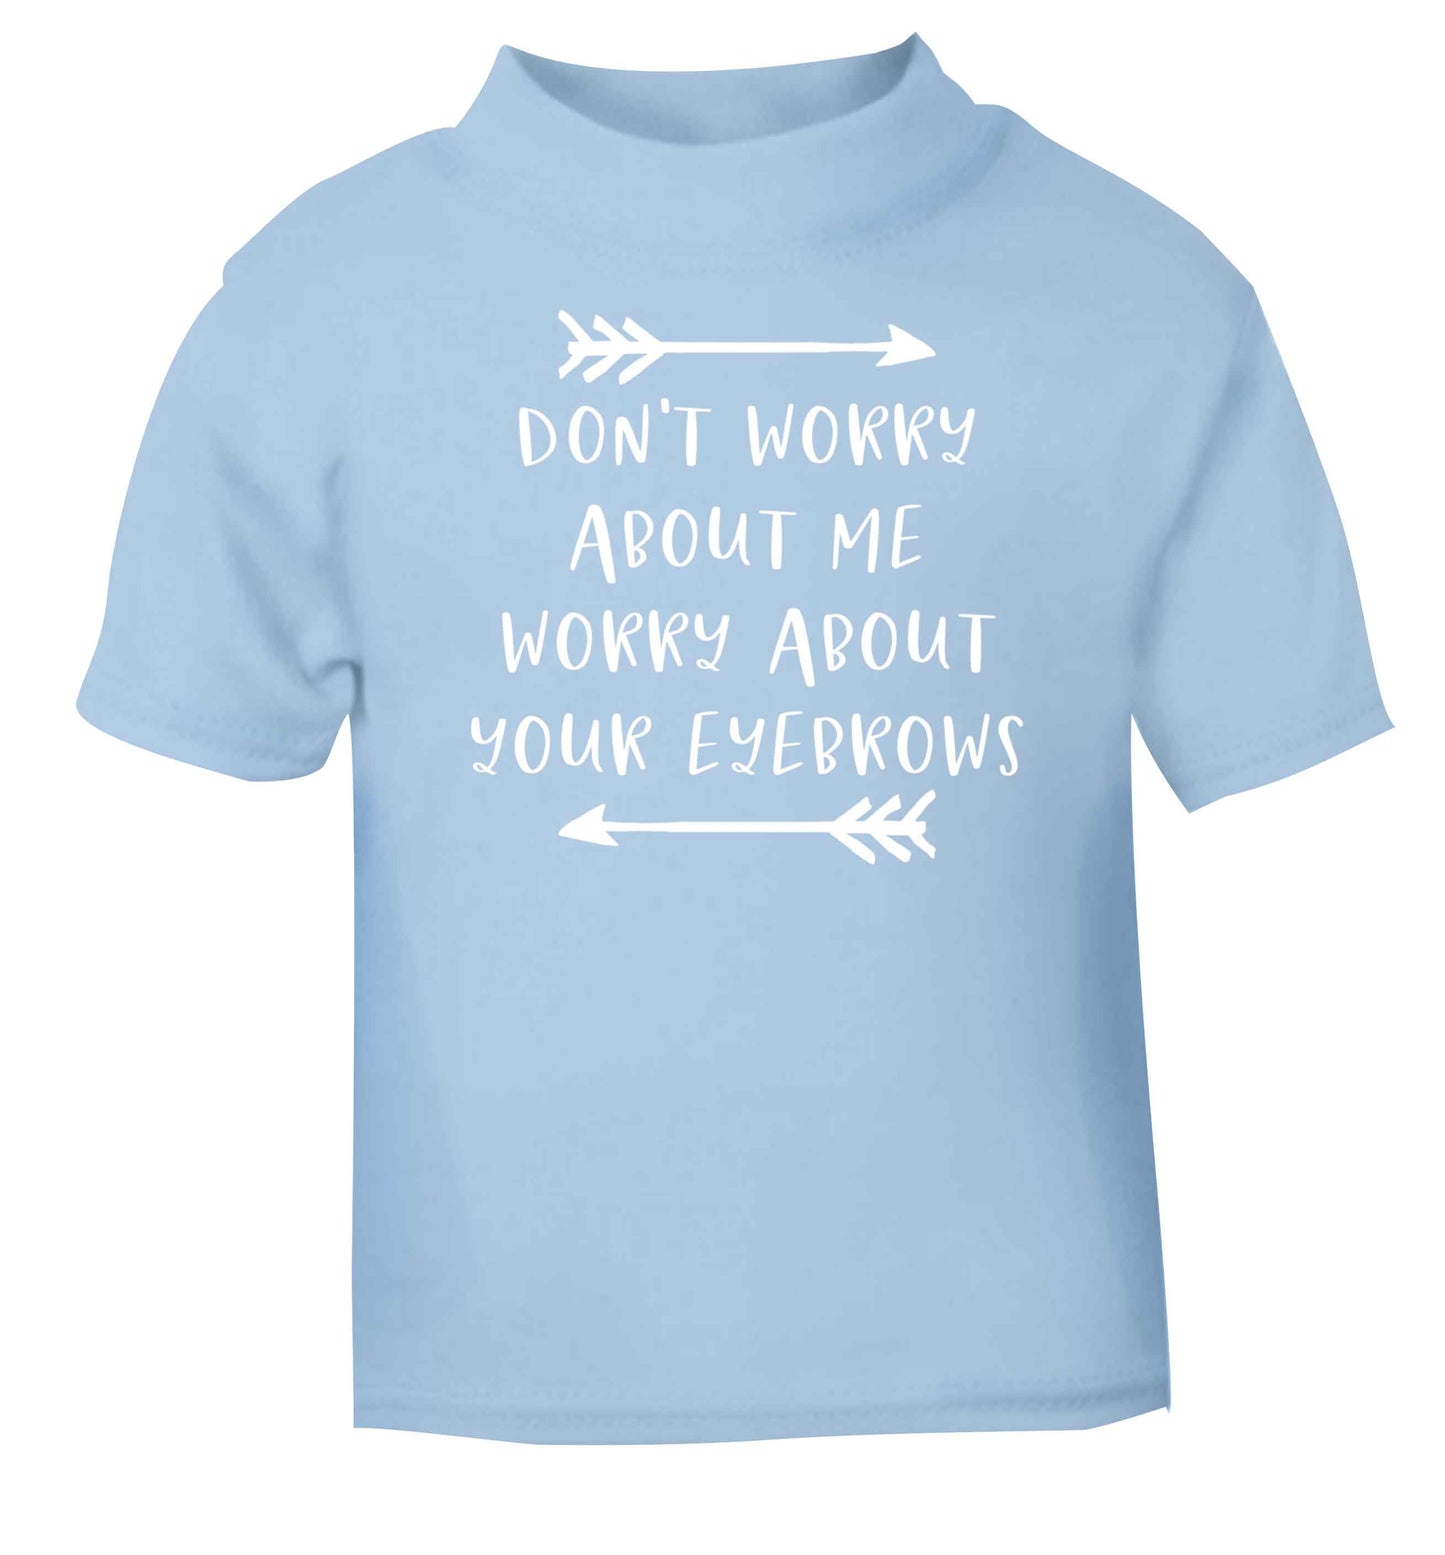 Don't worry about me worry about your eyebrows light blue baby toddler Tshirt 2 Years